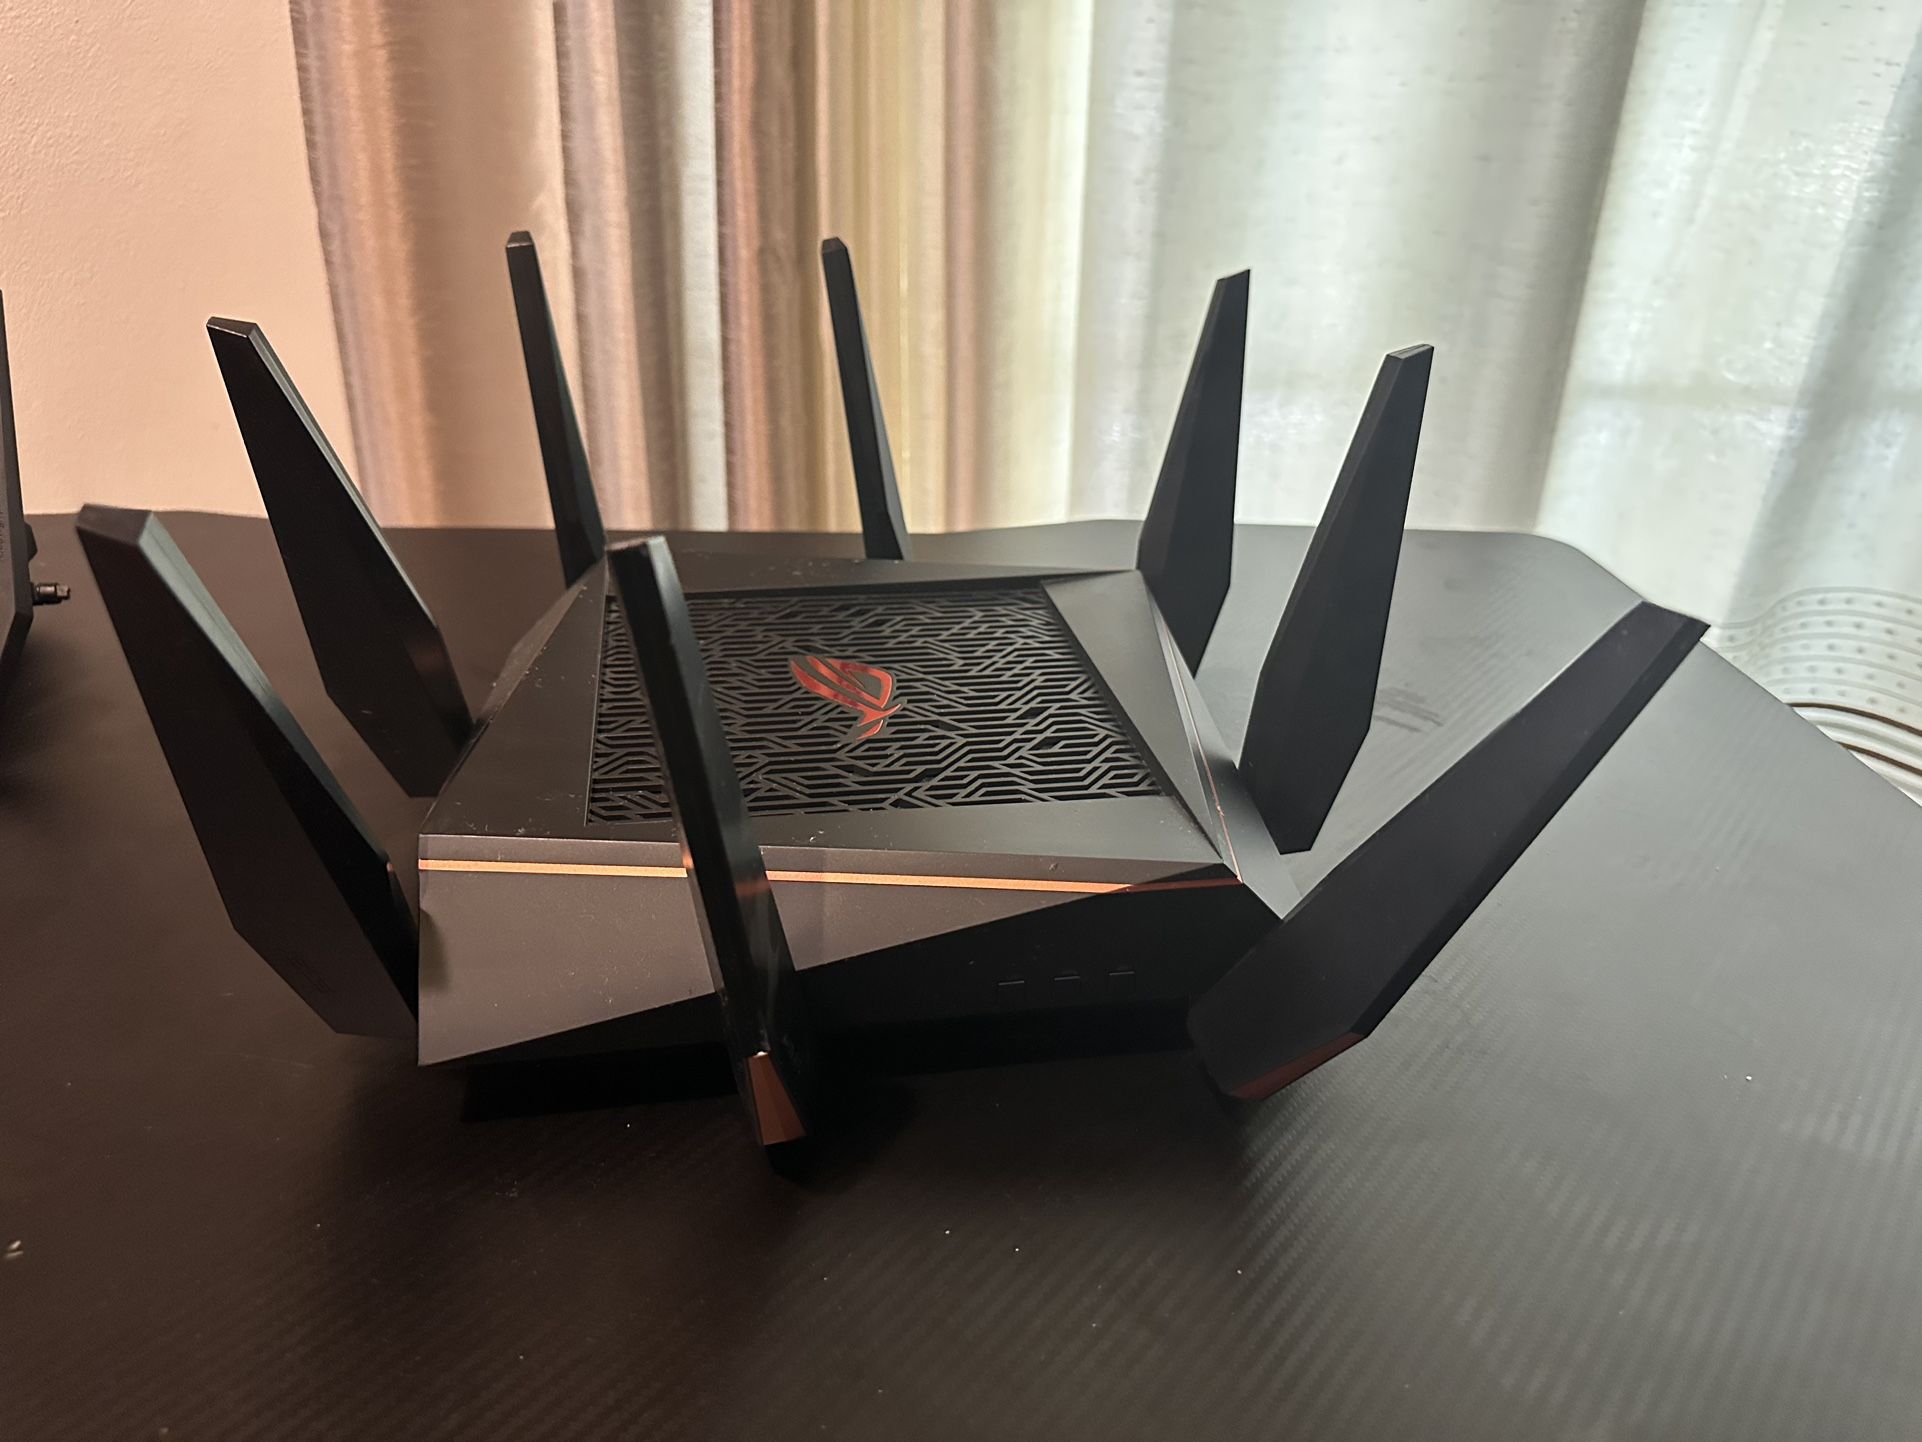 ASUS ROG Rapture WiFi Gaming Router (GT-AC5300)